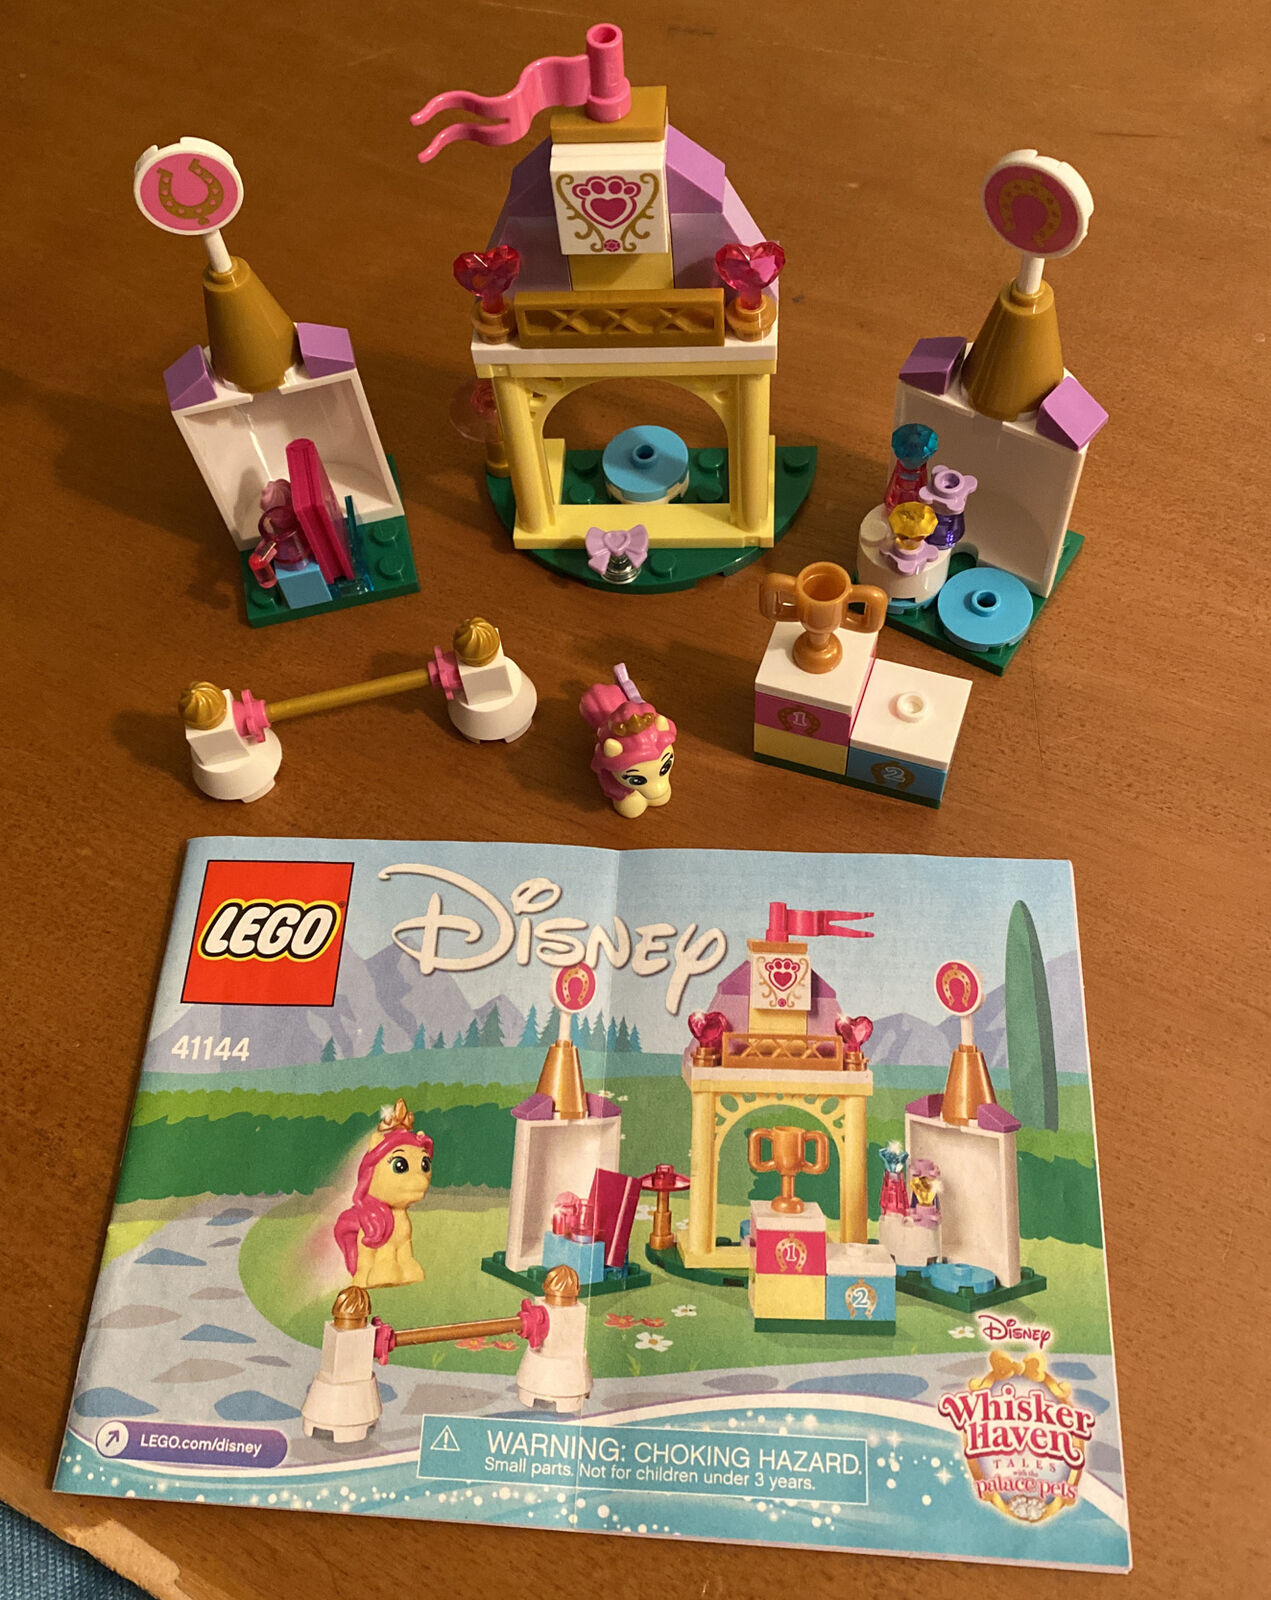 Lego Disney Whisker Haven Tales with the Palace Pets 41144 - Complete - No Box